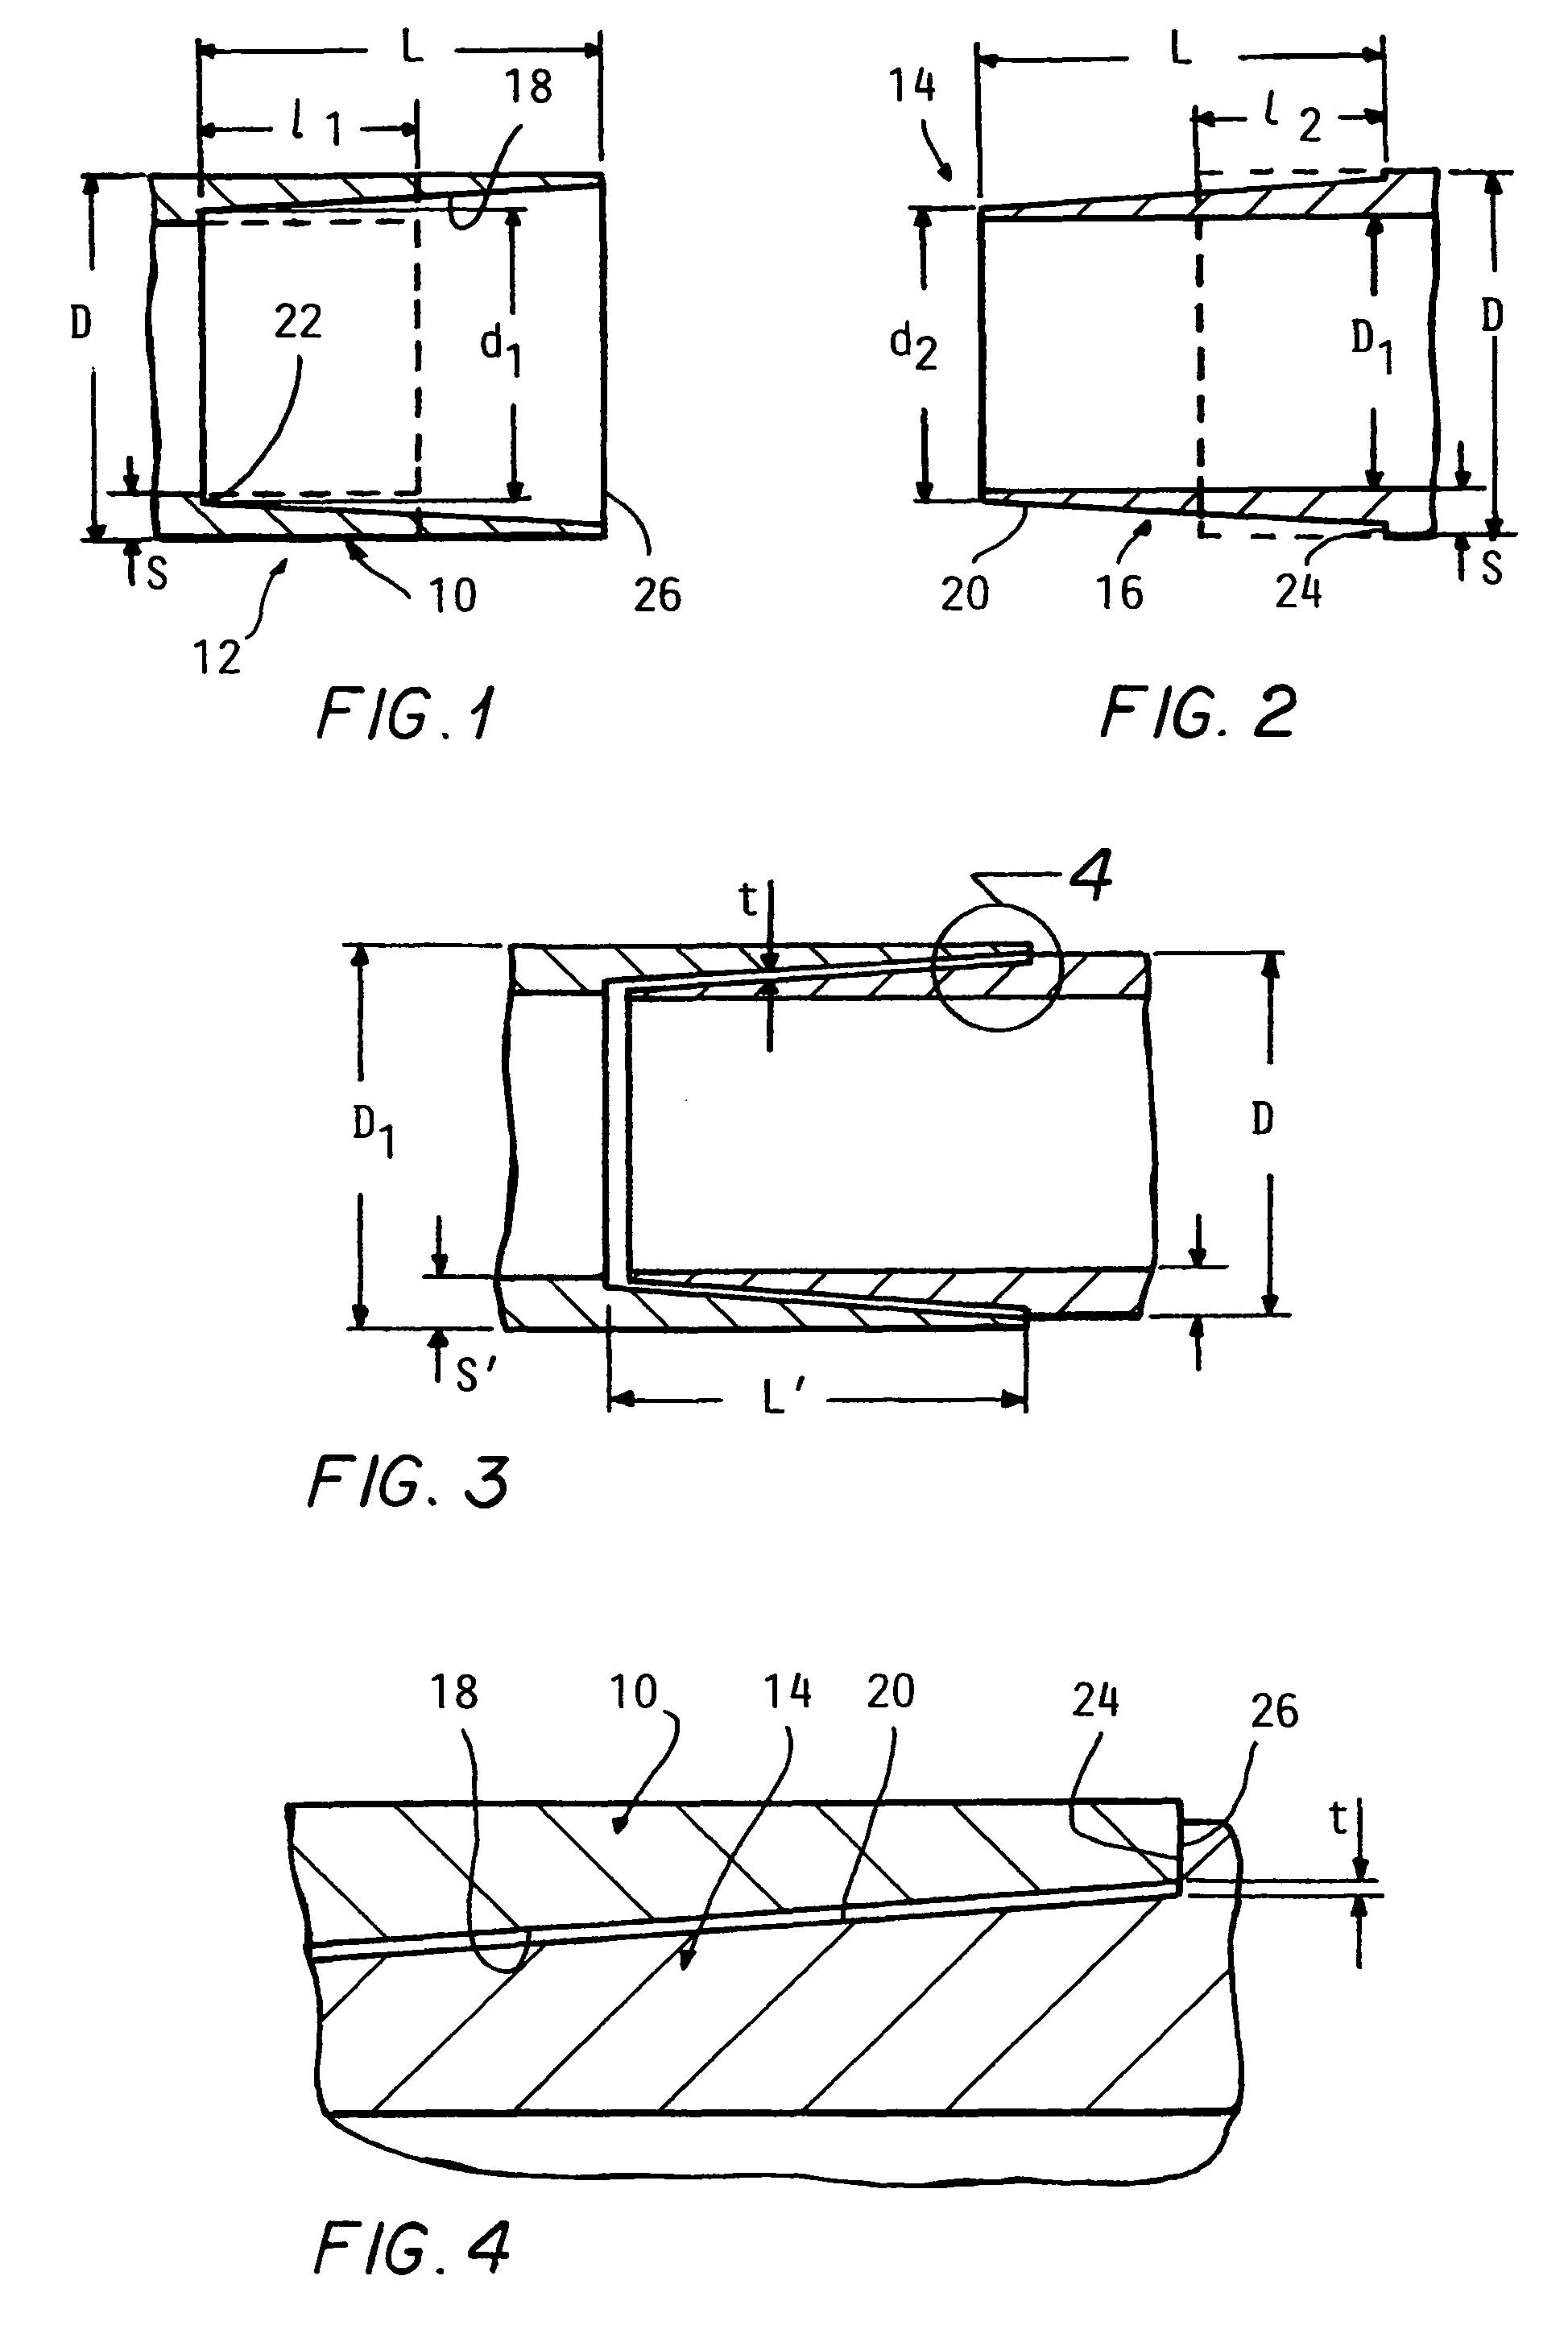 Method for joining ends of sections of pipe